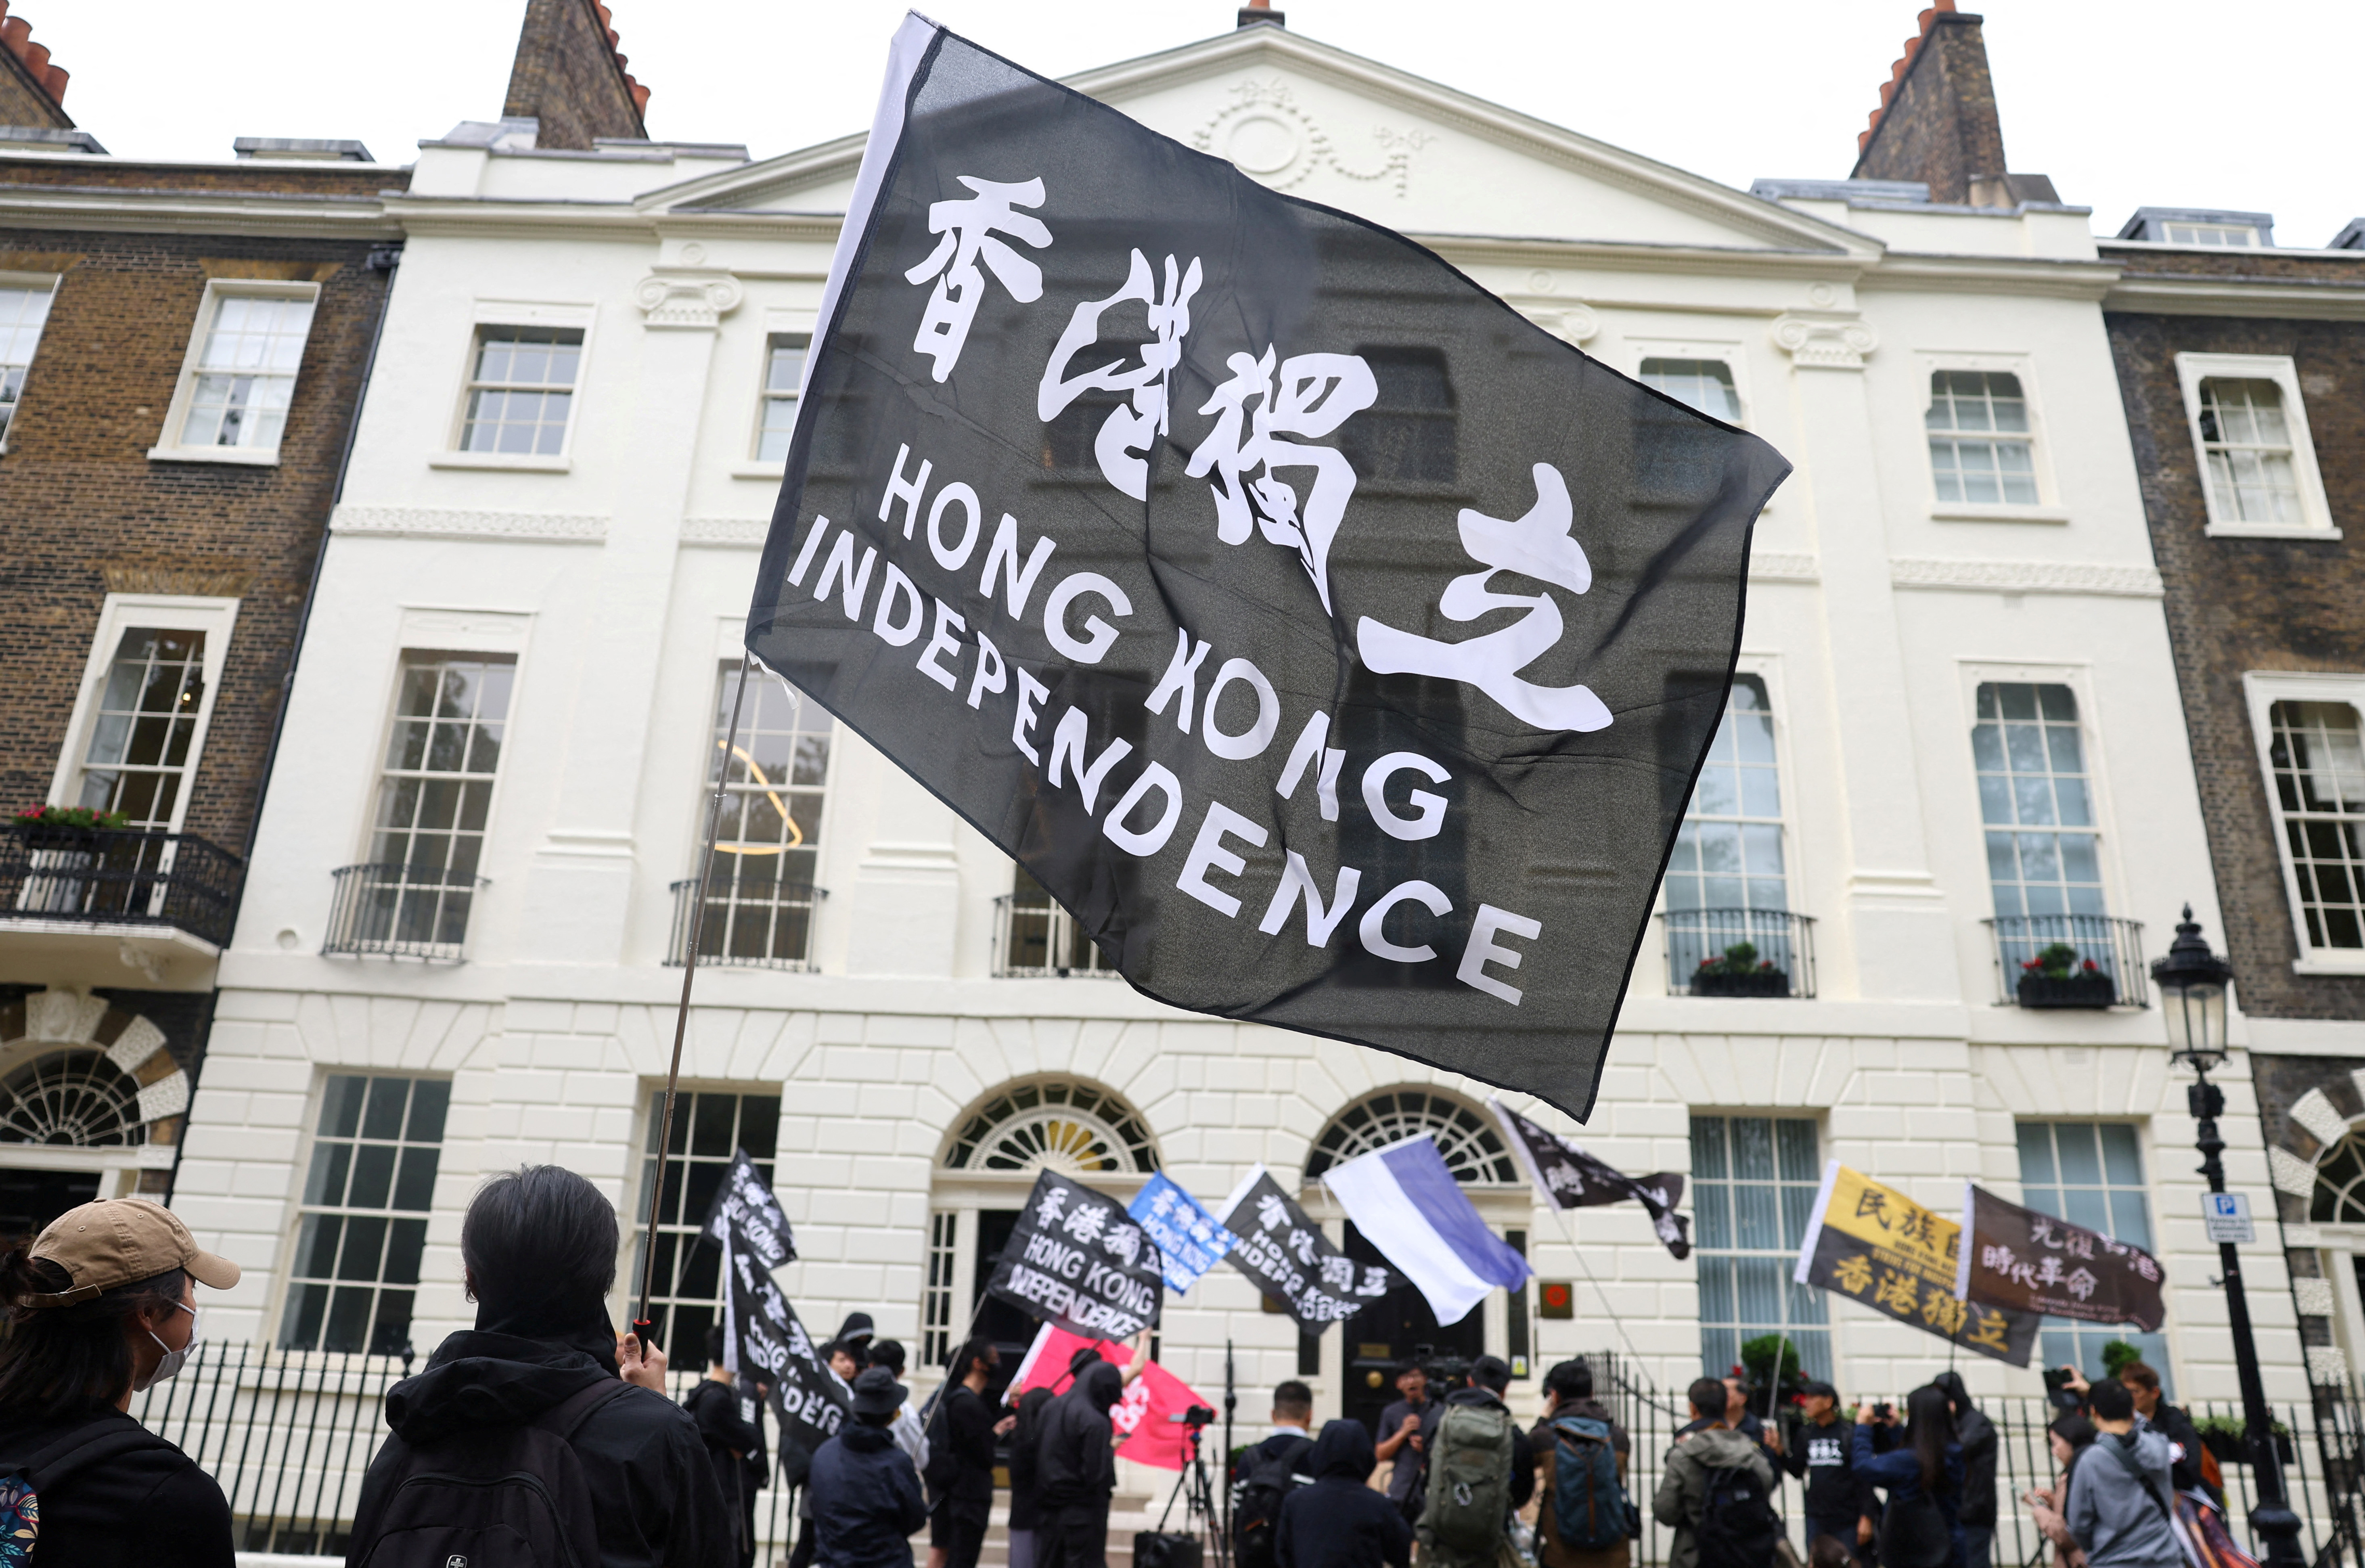 People demonstrate outside the Hong Kong Economic and Trade Office, after three men were charged with assisting Hong Kong's foreign intelligence service in Britain, in London